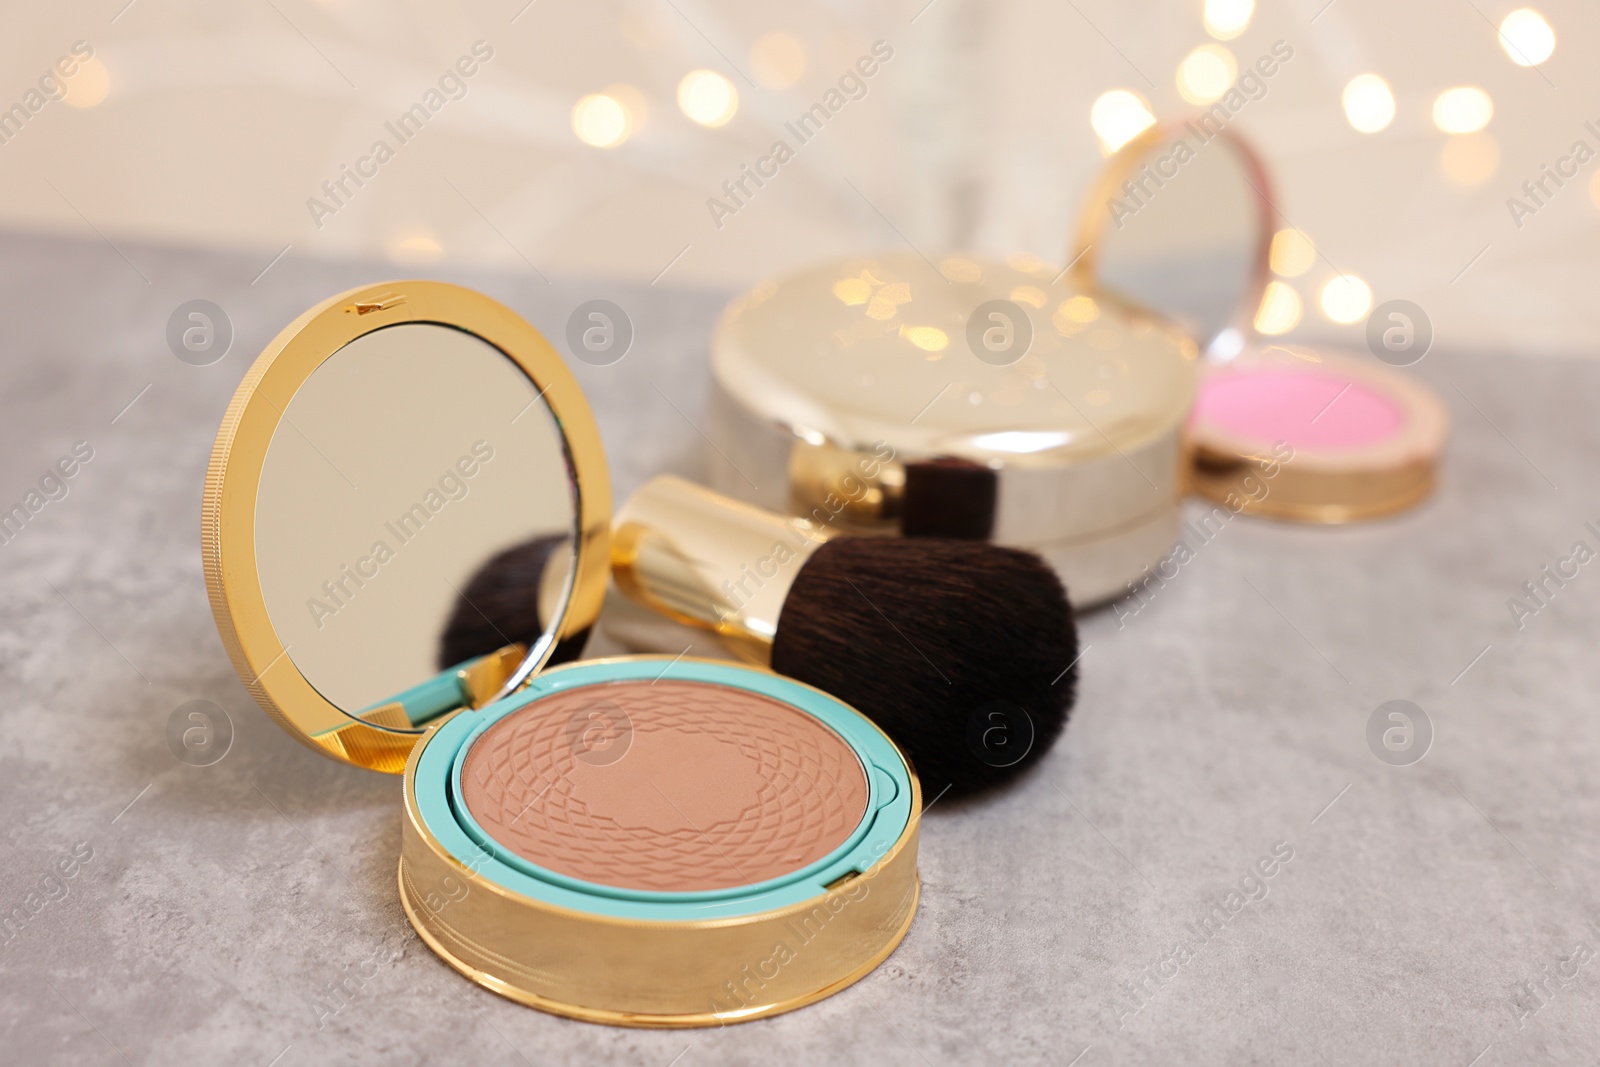 Photo of Face bronzer and makeup brush on grey textured table against blurred lights, closeup